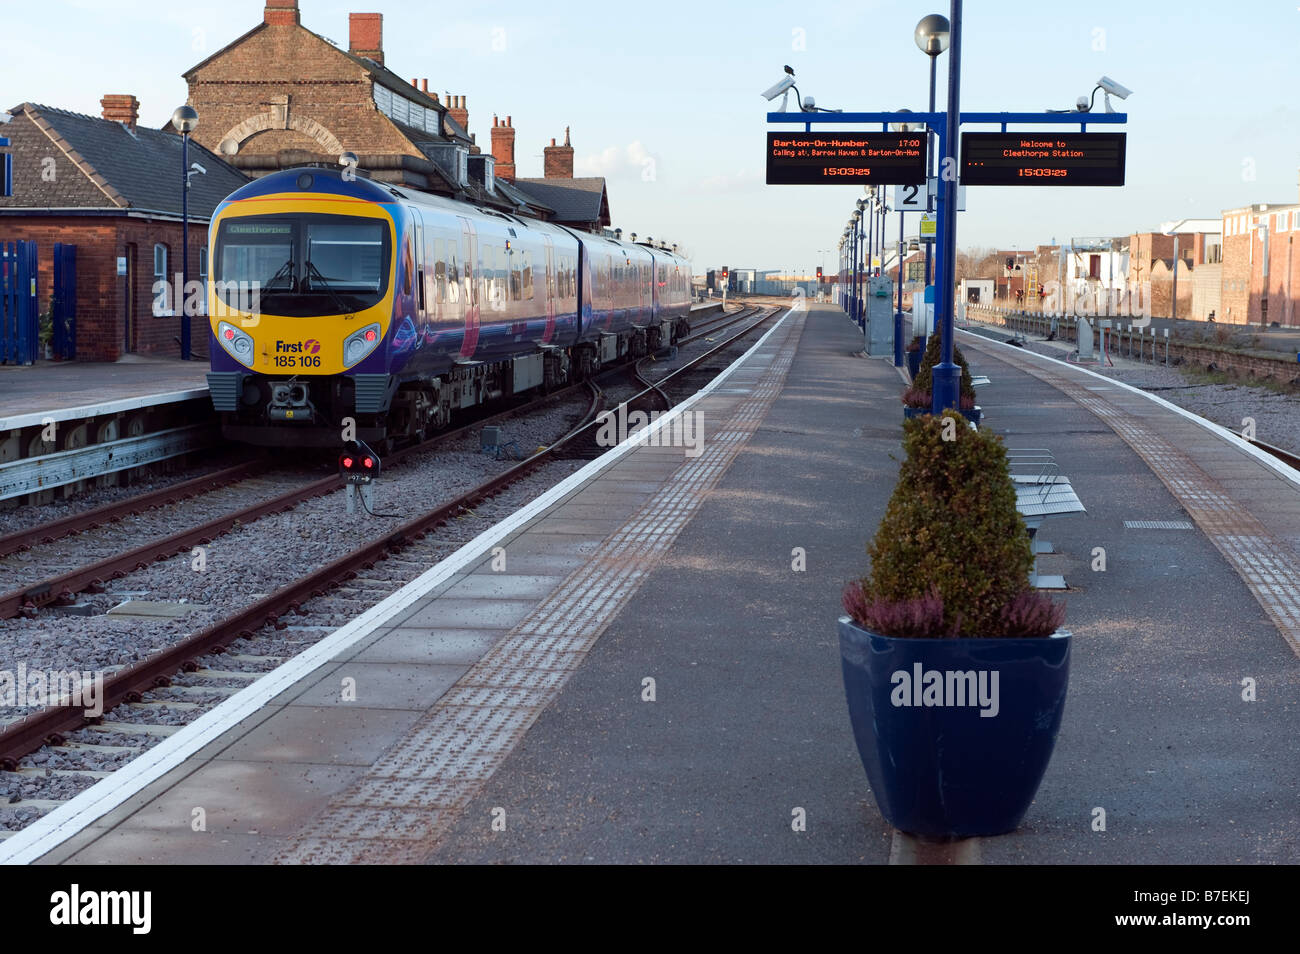 Cleethorpes railway station, North East Lincolnshire,Great Britain Stock Photo